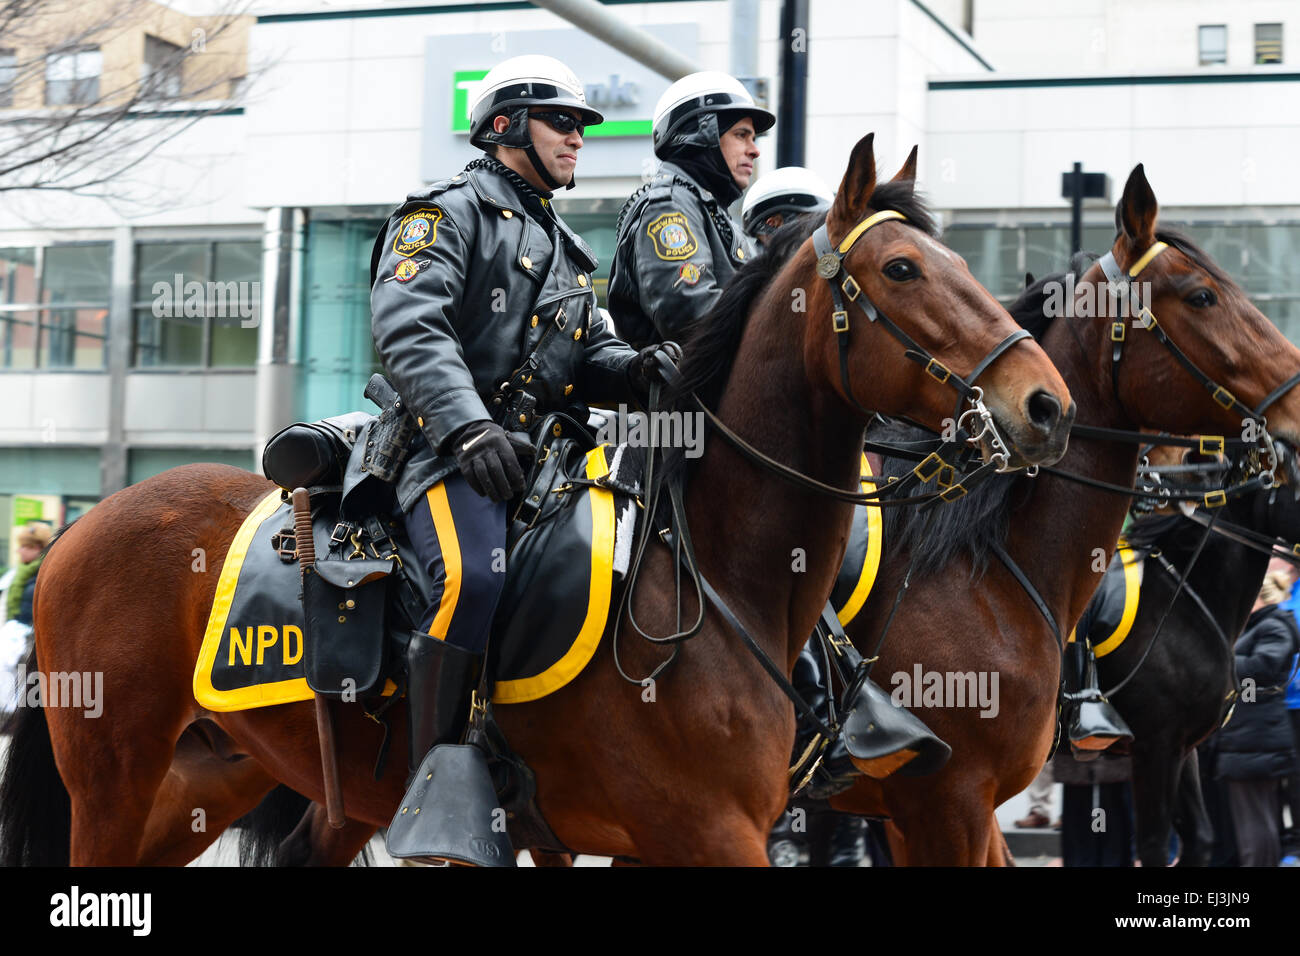 Newark Police Department mounted during the 2013 St. Patrick's Day parade. Newark, New Jersey. USA. Stock Photo